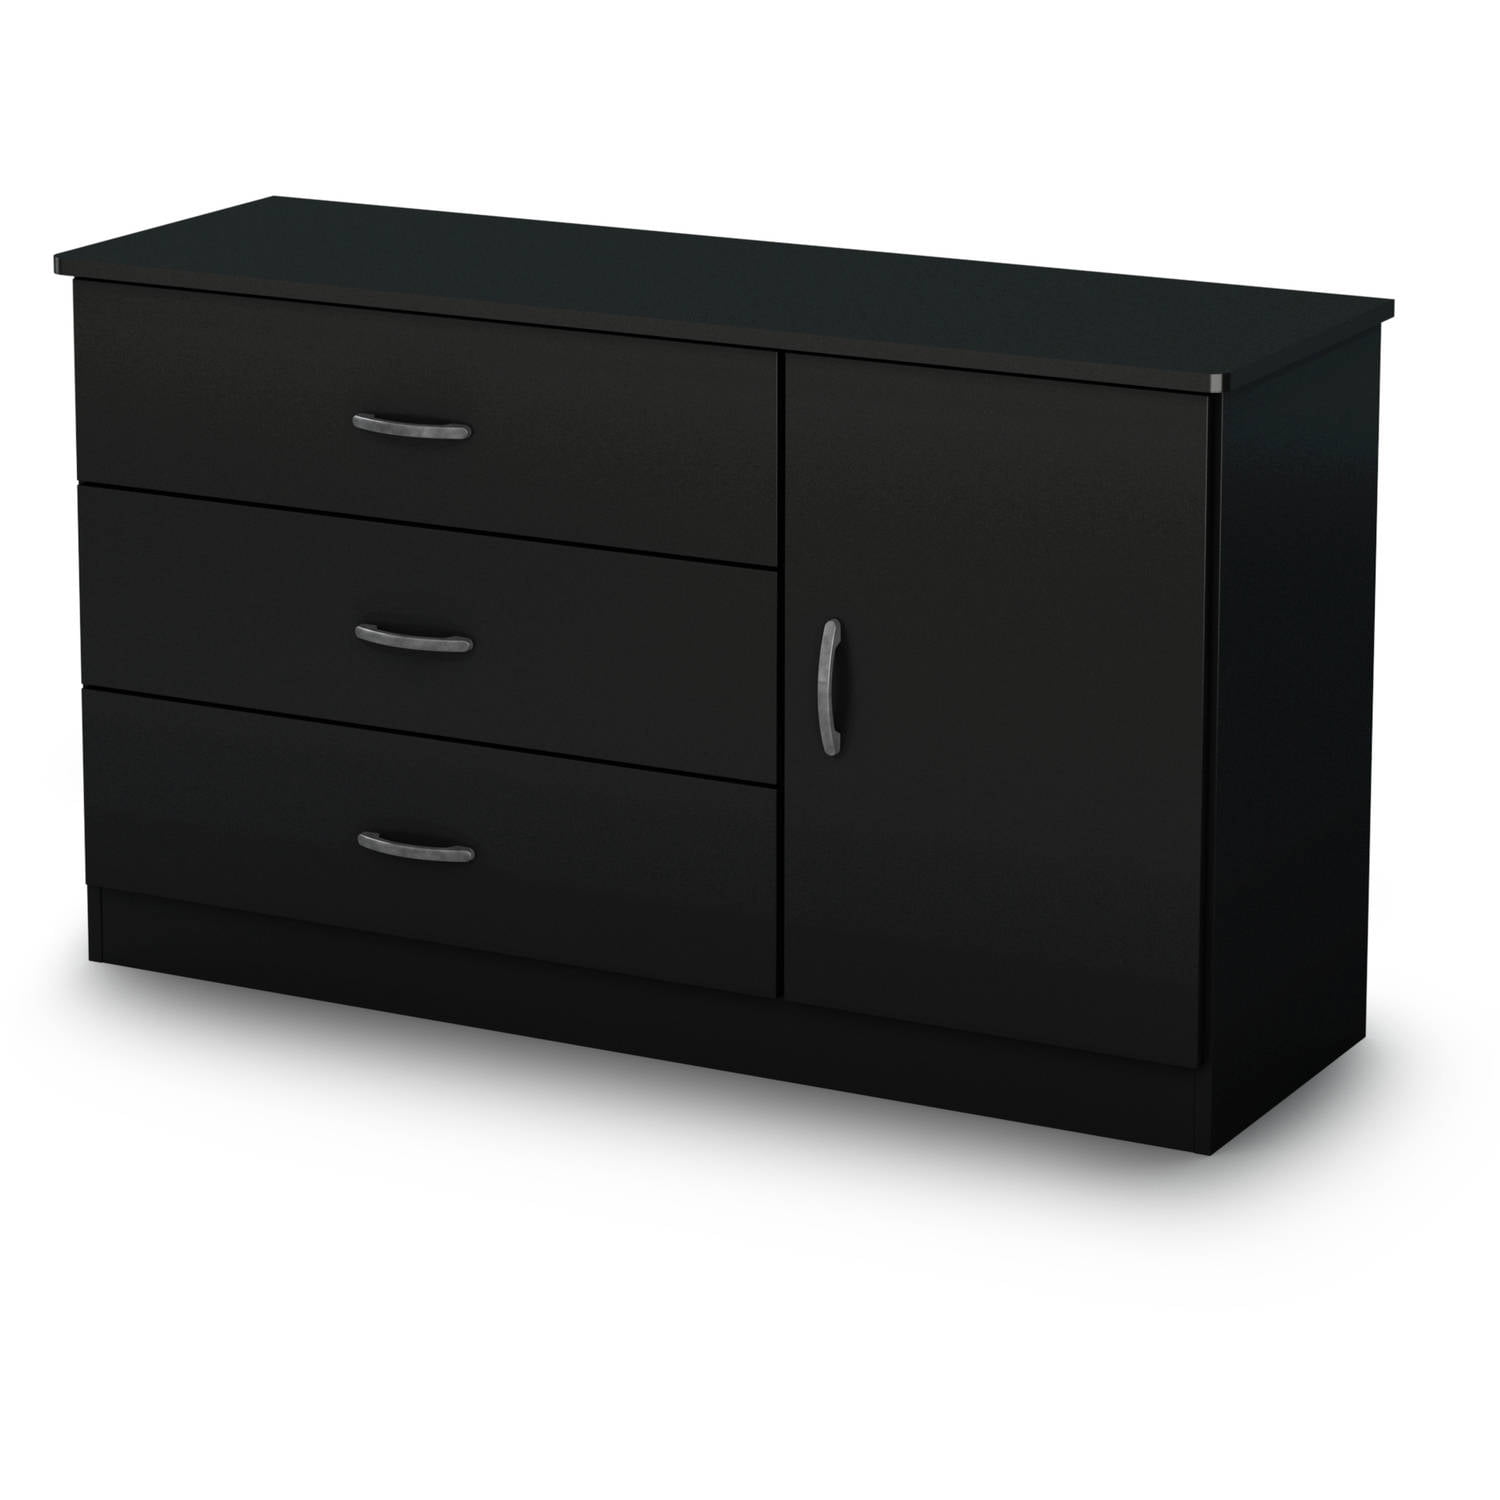 South Shore Smart Basics 3 Drawer Dresser With Door Chocolate